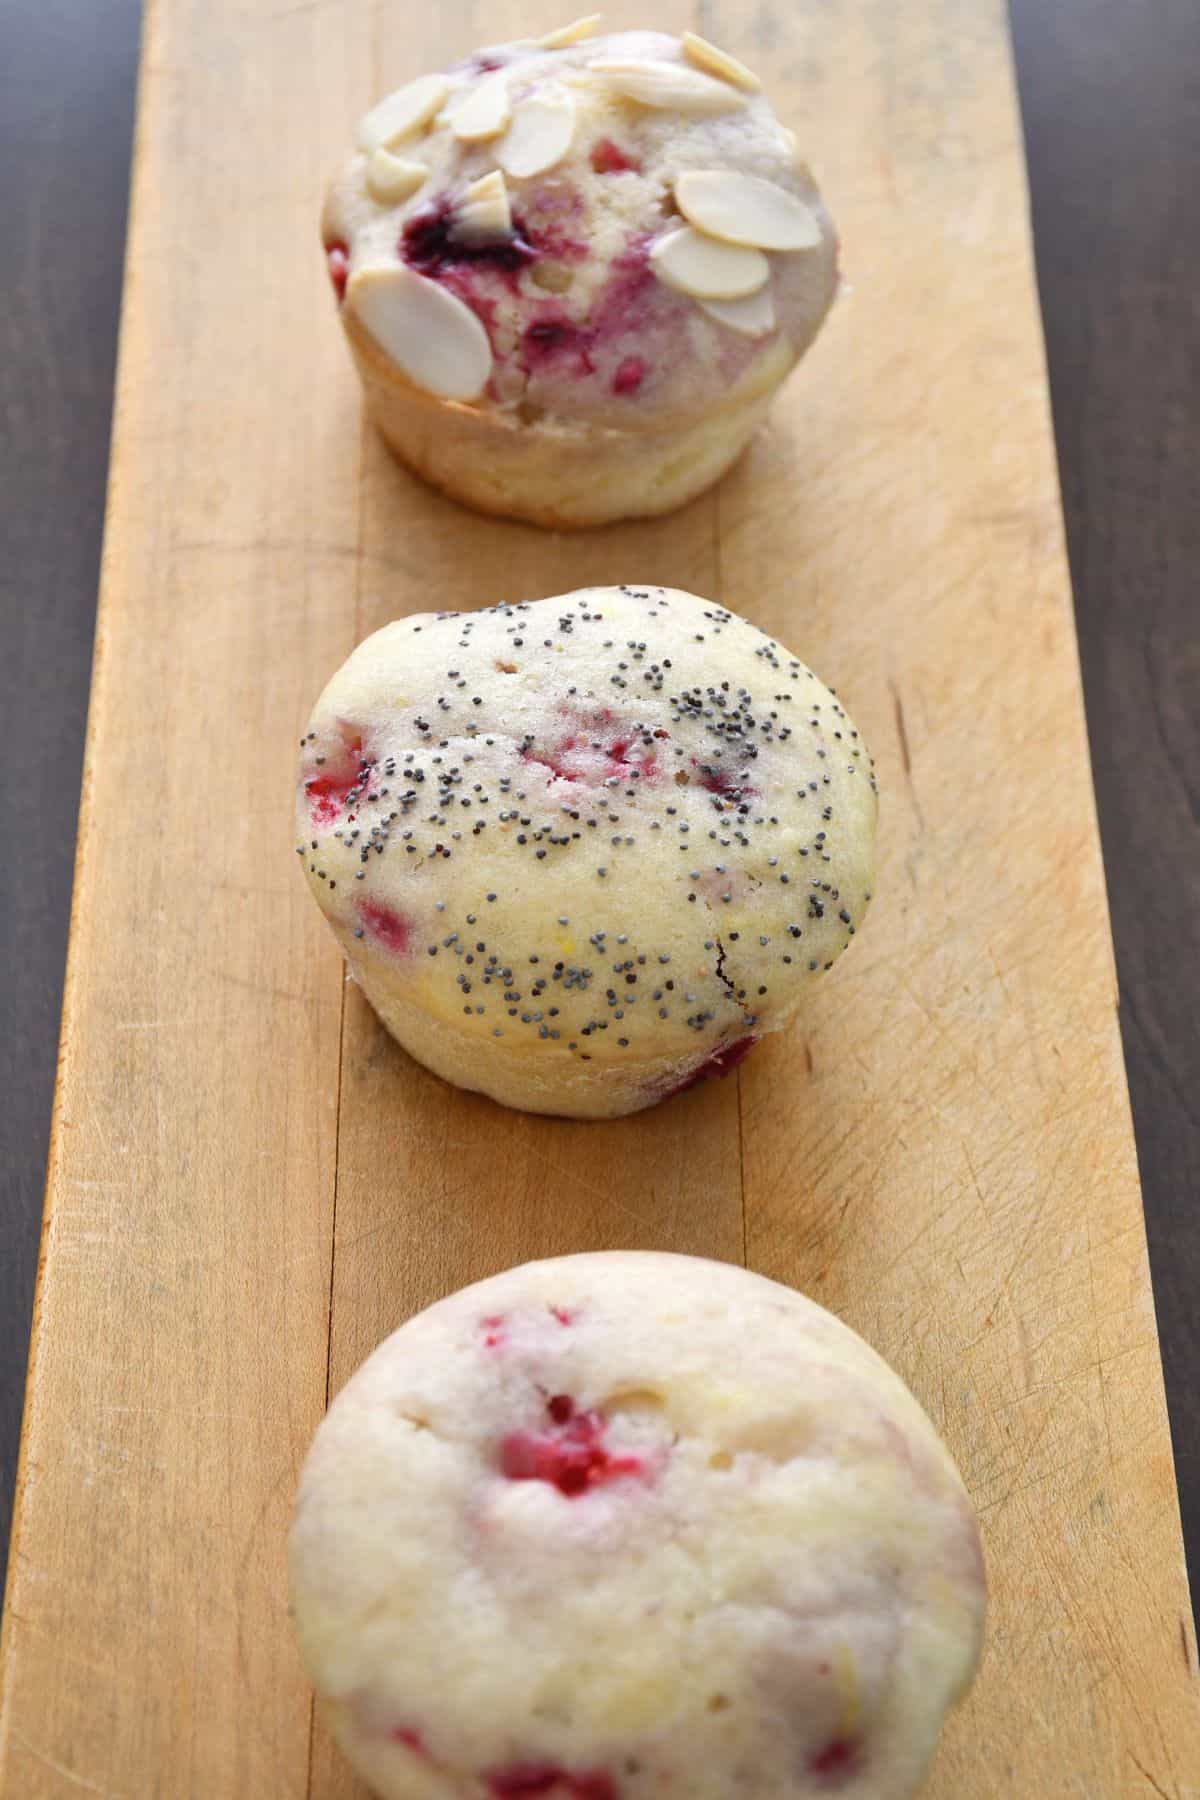 Three variations of toppings for the kidney friendly lemon raspberry muffin recipe (Nature, poppy seeds, sliced almonds).